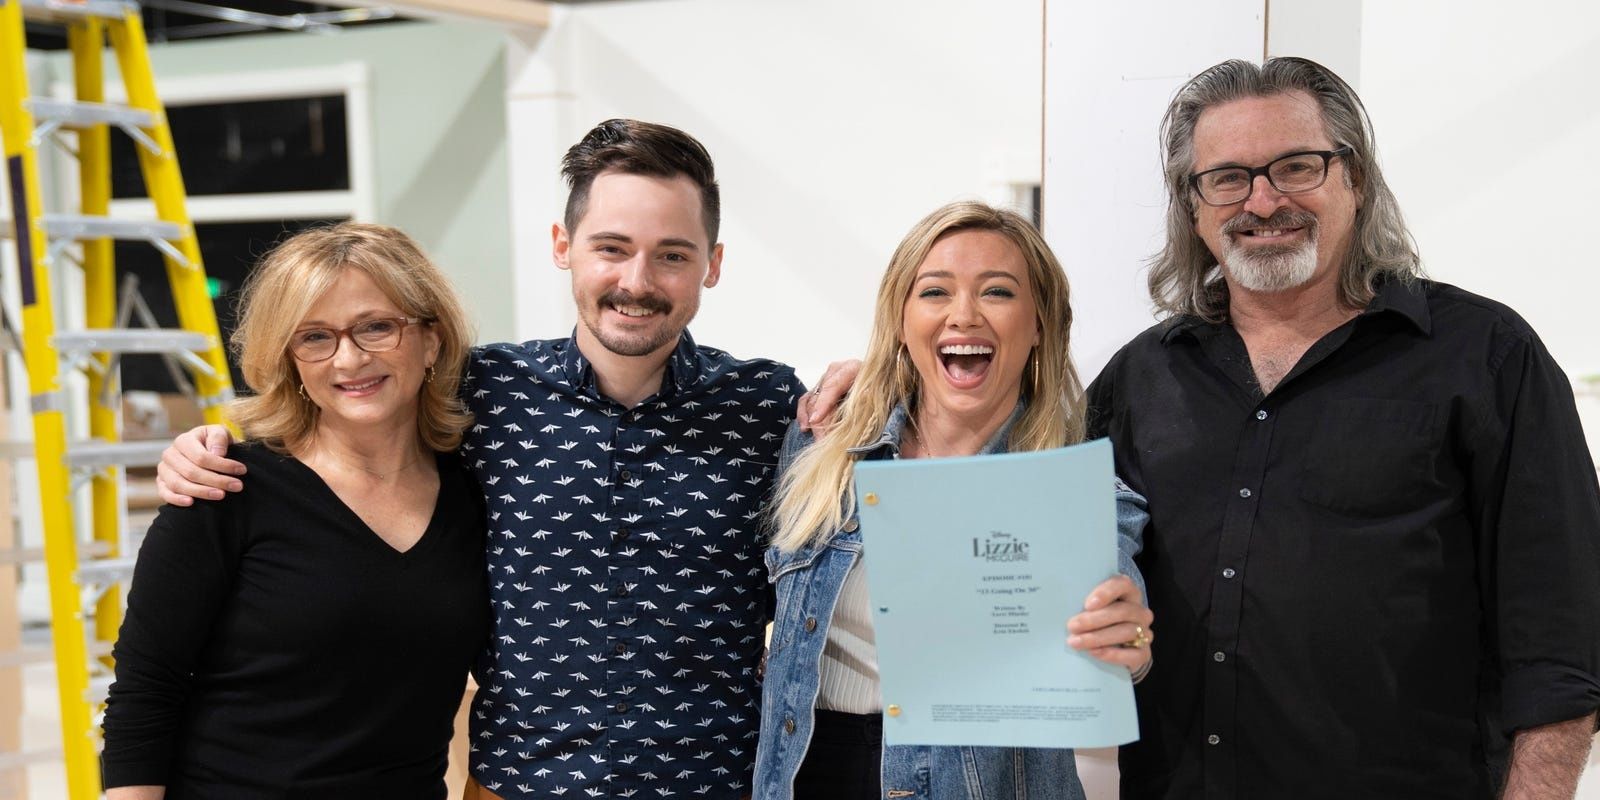 Hallie Todd, Jake Thomas, Hilary Duff, Robert Carradine holding script for the Lizzie McGuire reboot